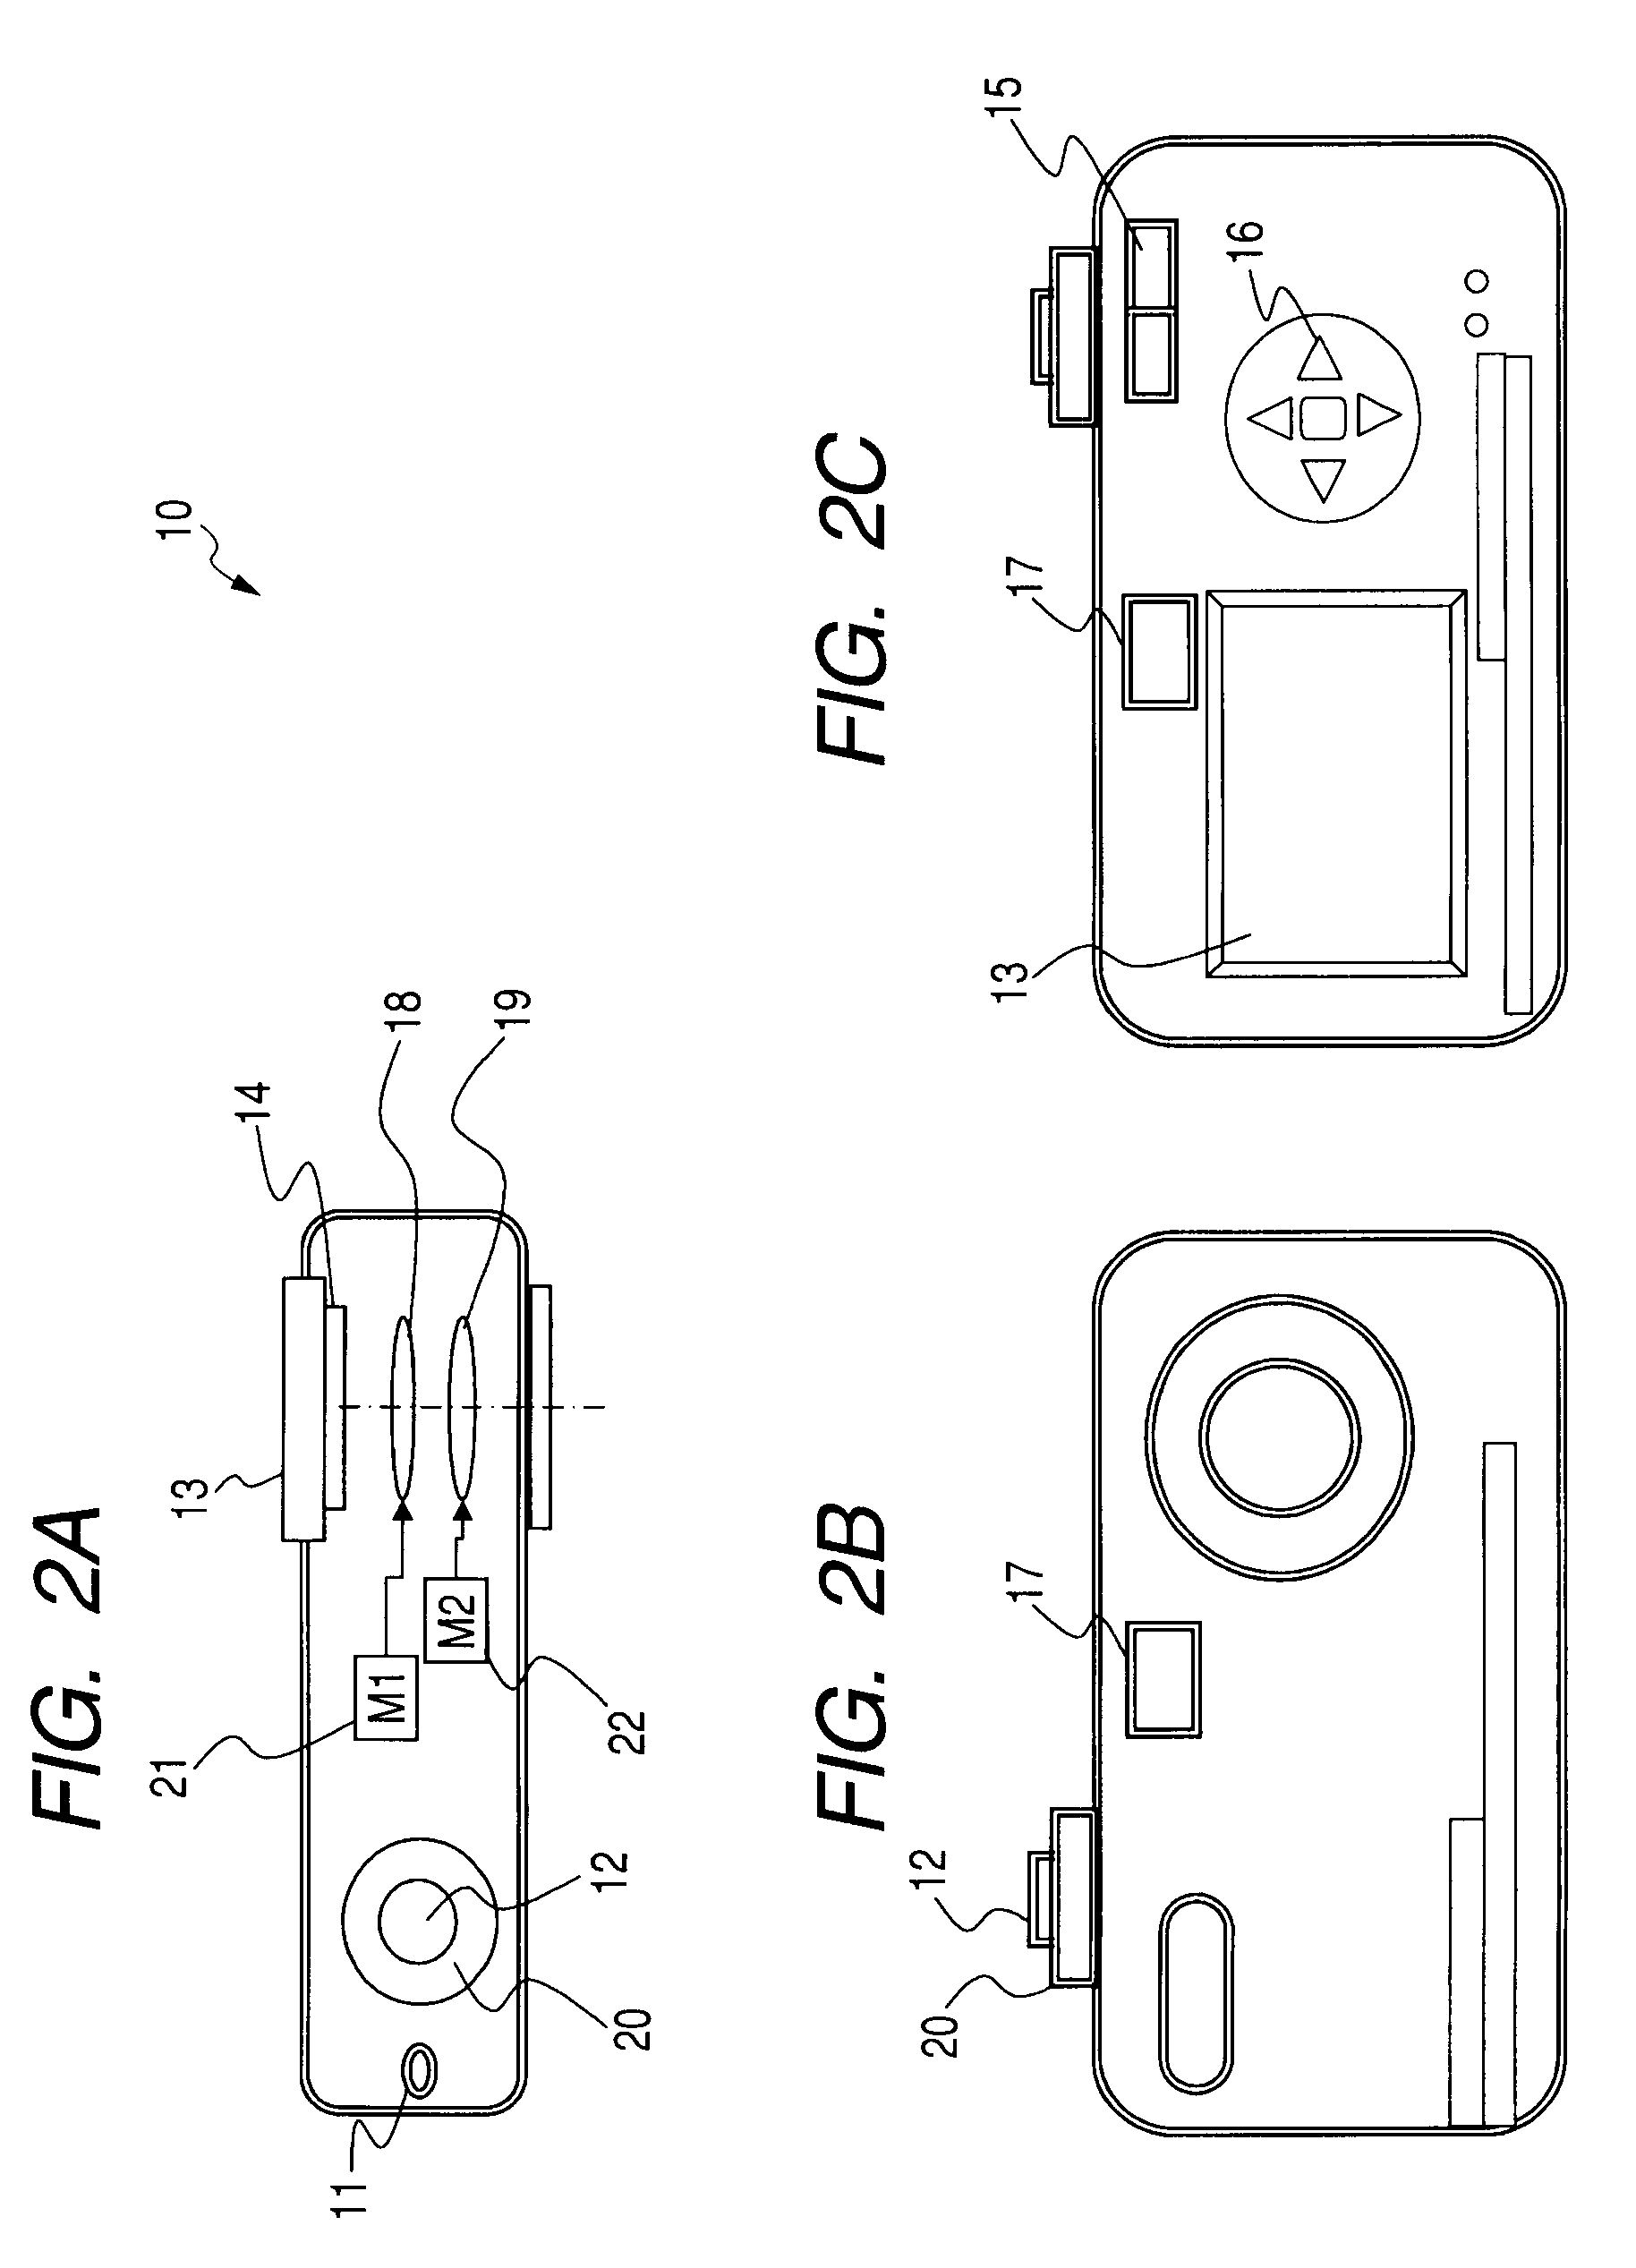 Imaging apparatus, imaging apparatus control method and computer program product, with eye blink detection features